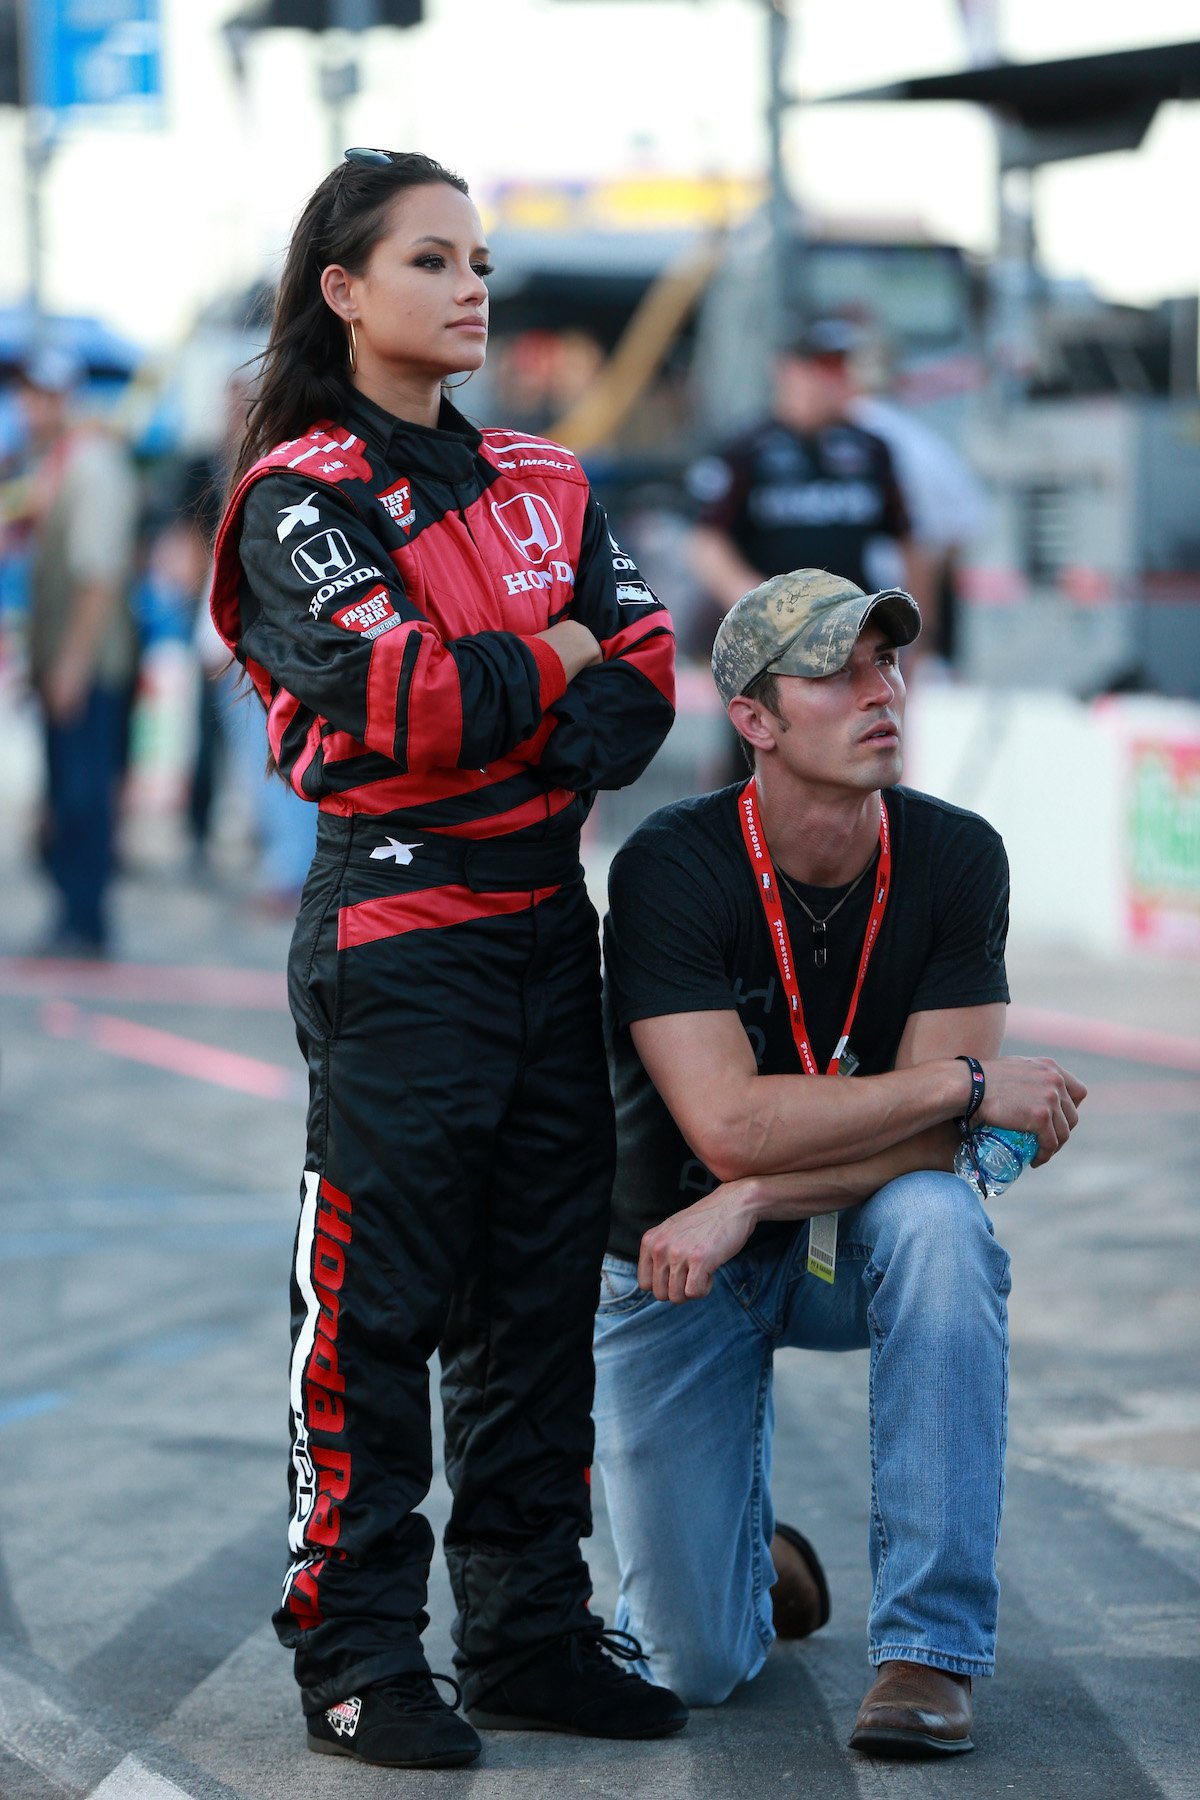 Jessica Graf stands in racing attire, looking off into the distance, while husband Cody Nickson kneels by her side.